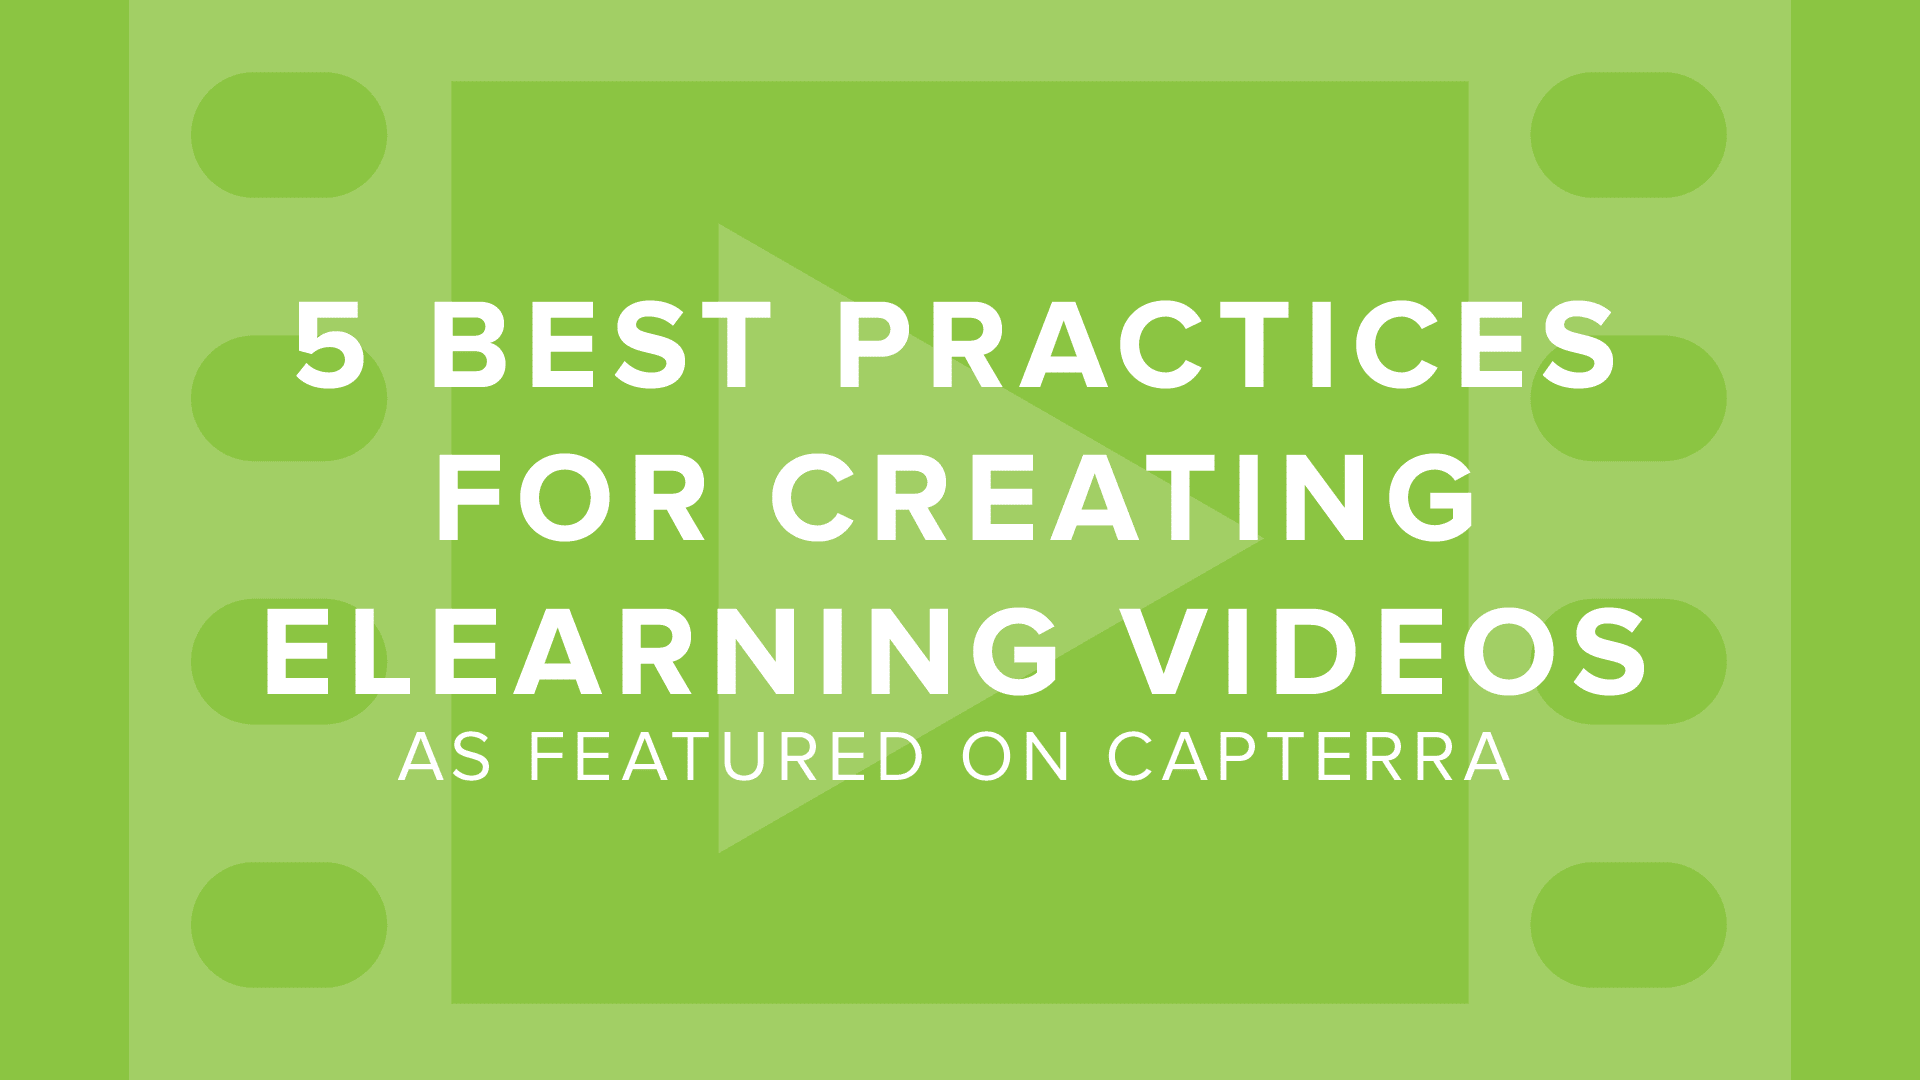 DigitalChalk: As Featured on Capterra: 5 Best Practices for Creating eLearning Videos